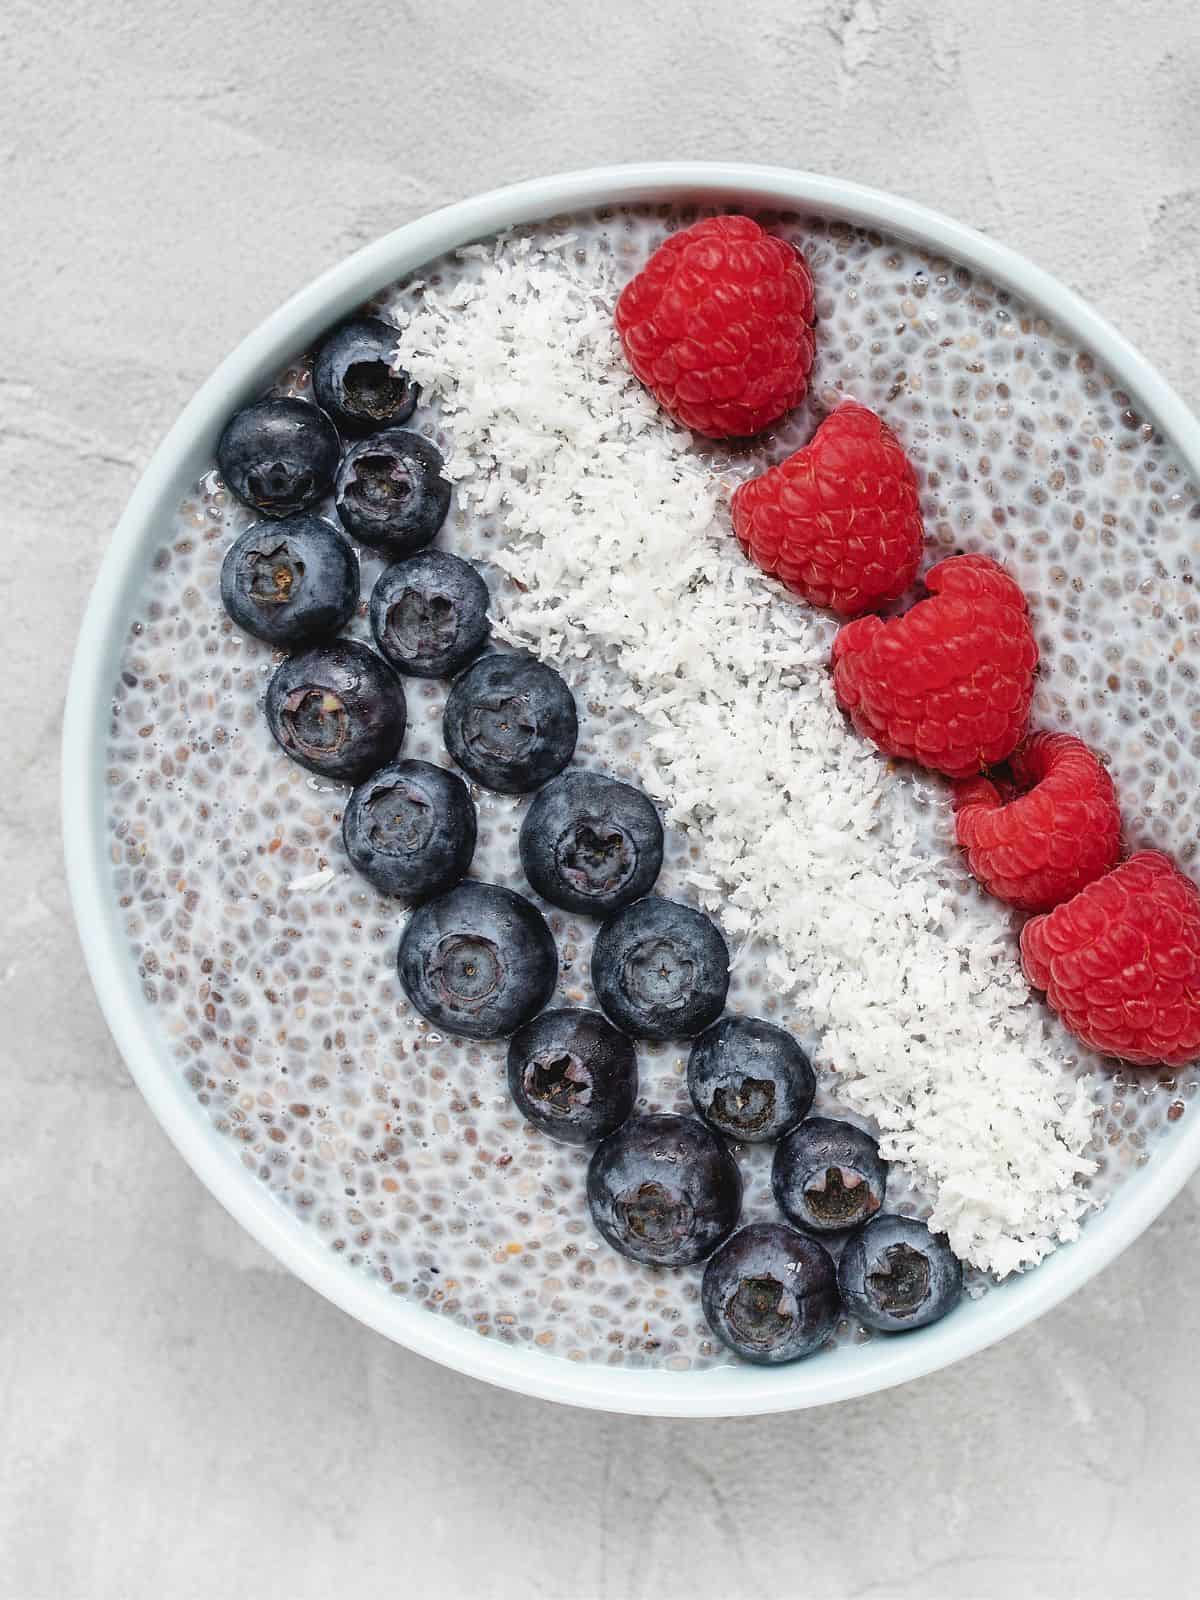 Chia pudding in white bowl topped with blueberries, coconut flakes, and raspberries.
